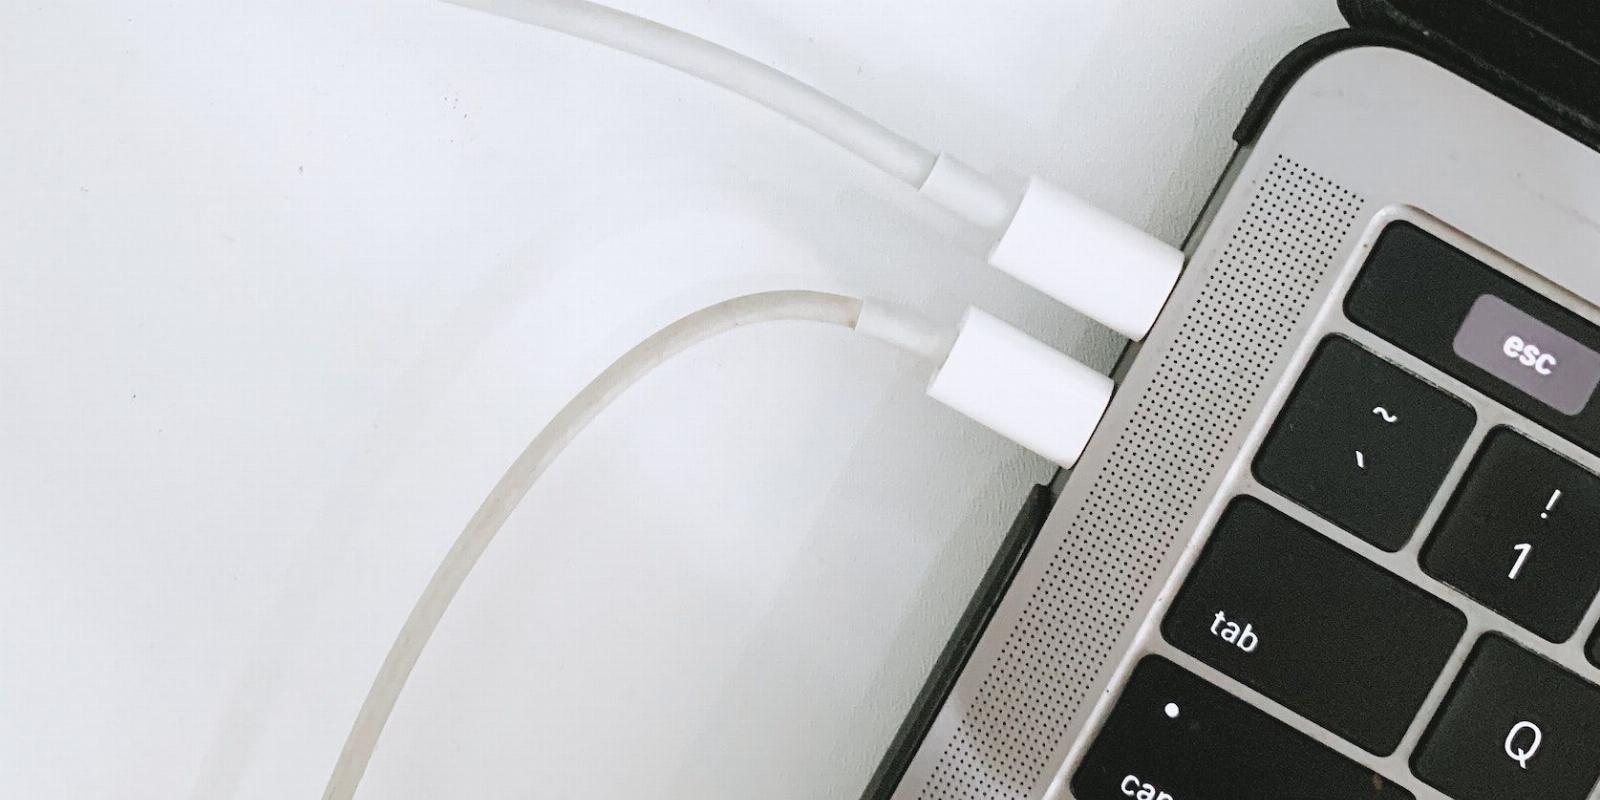 5 Fixes to Try When Your Mac’s USB-C Port Stops Working